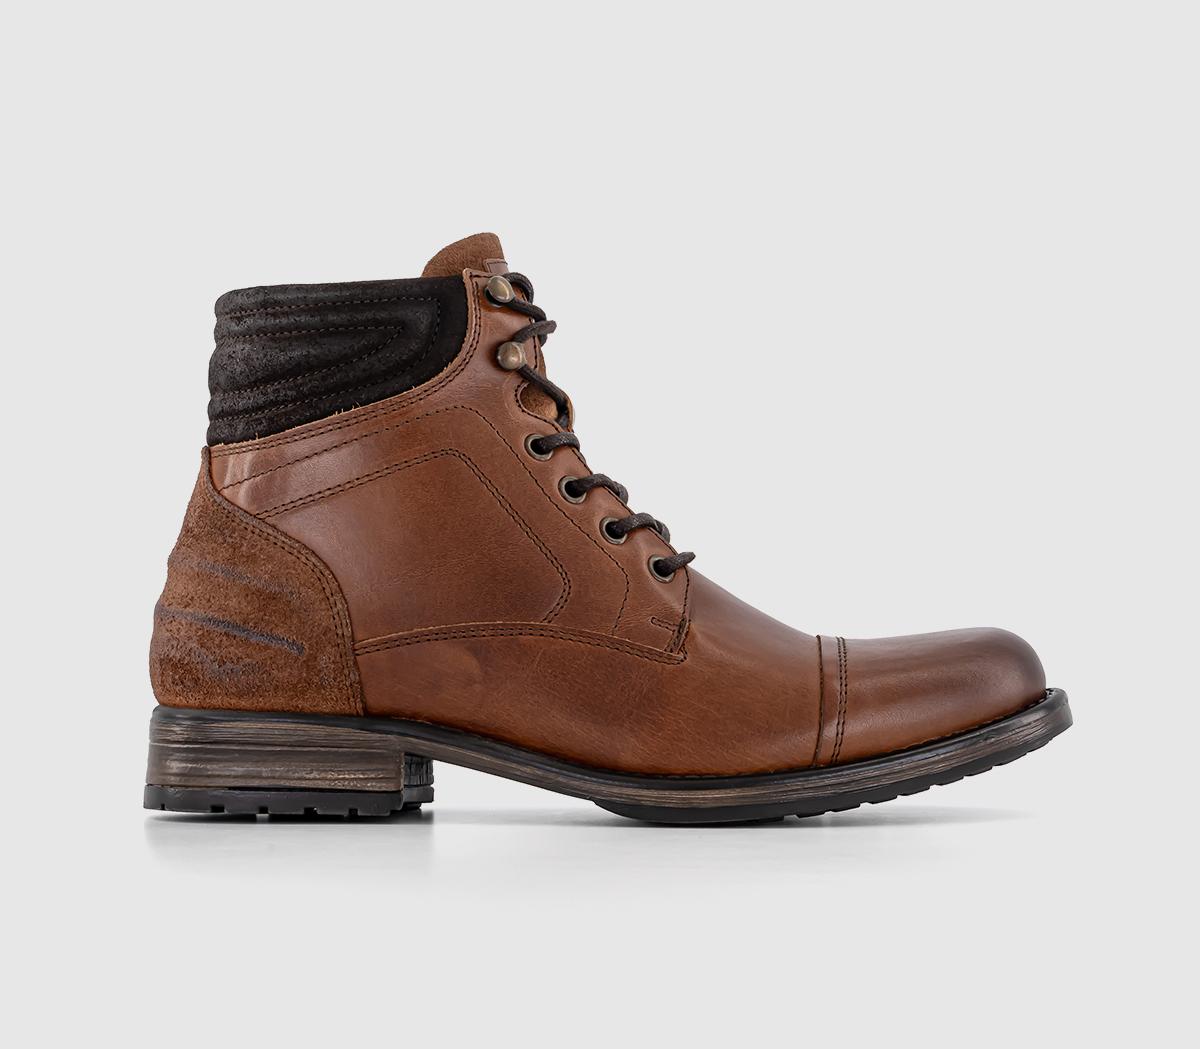 OFFICEBrecon Toe Cap BootsBrown Leather